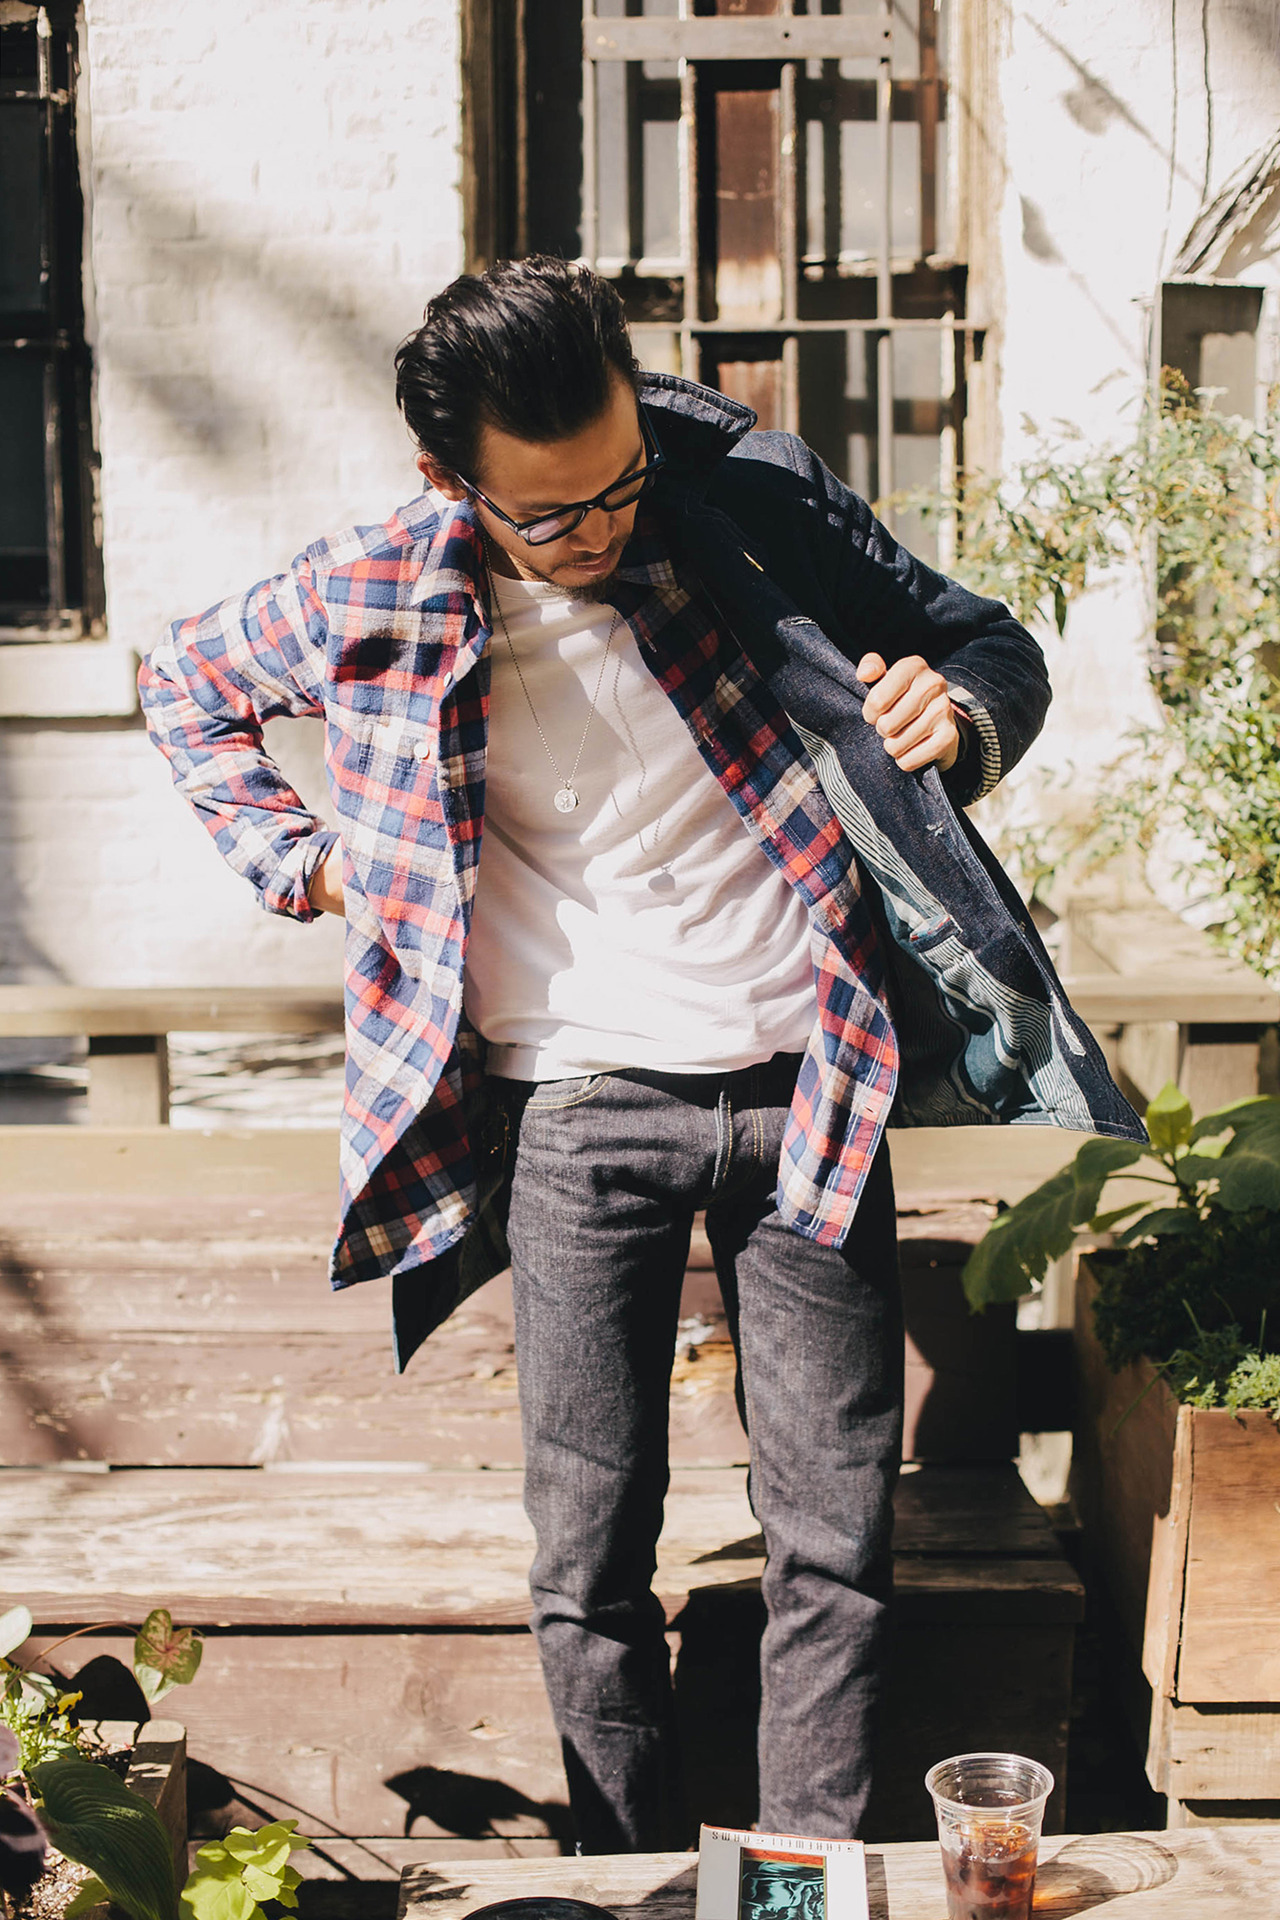 Steezy Asian Dudes - natebui: I worked on a project with Gap and VSCO...